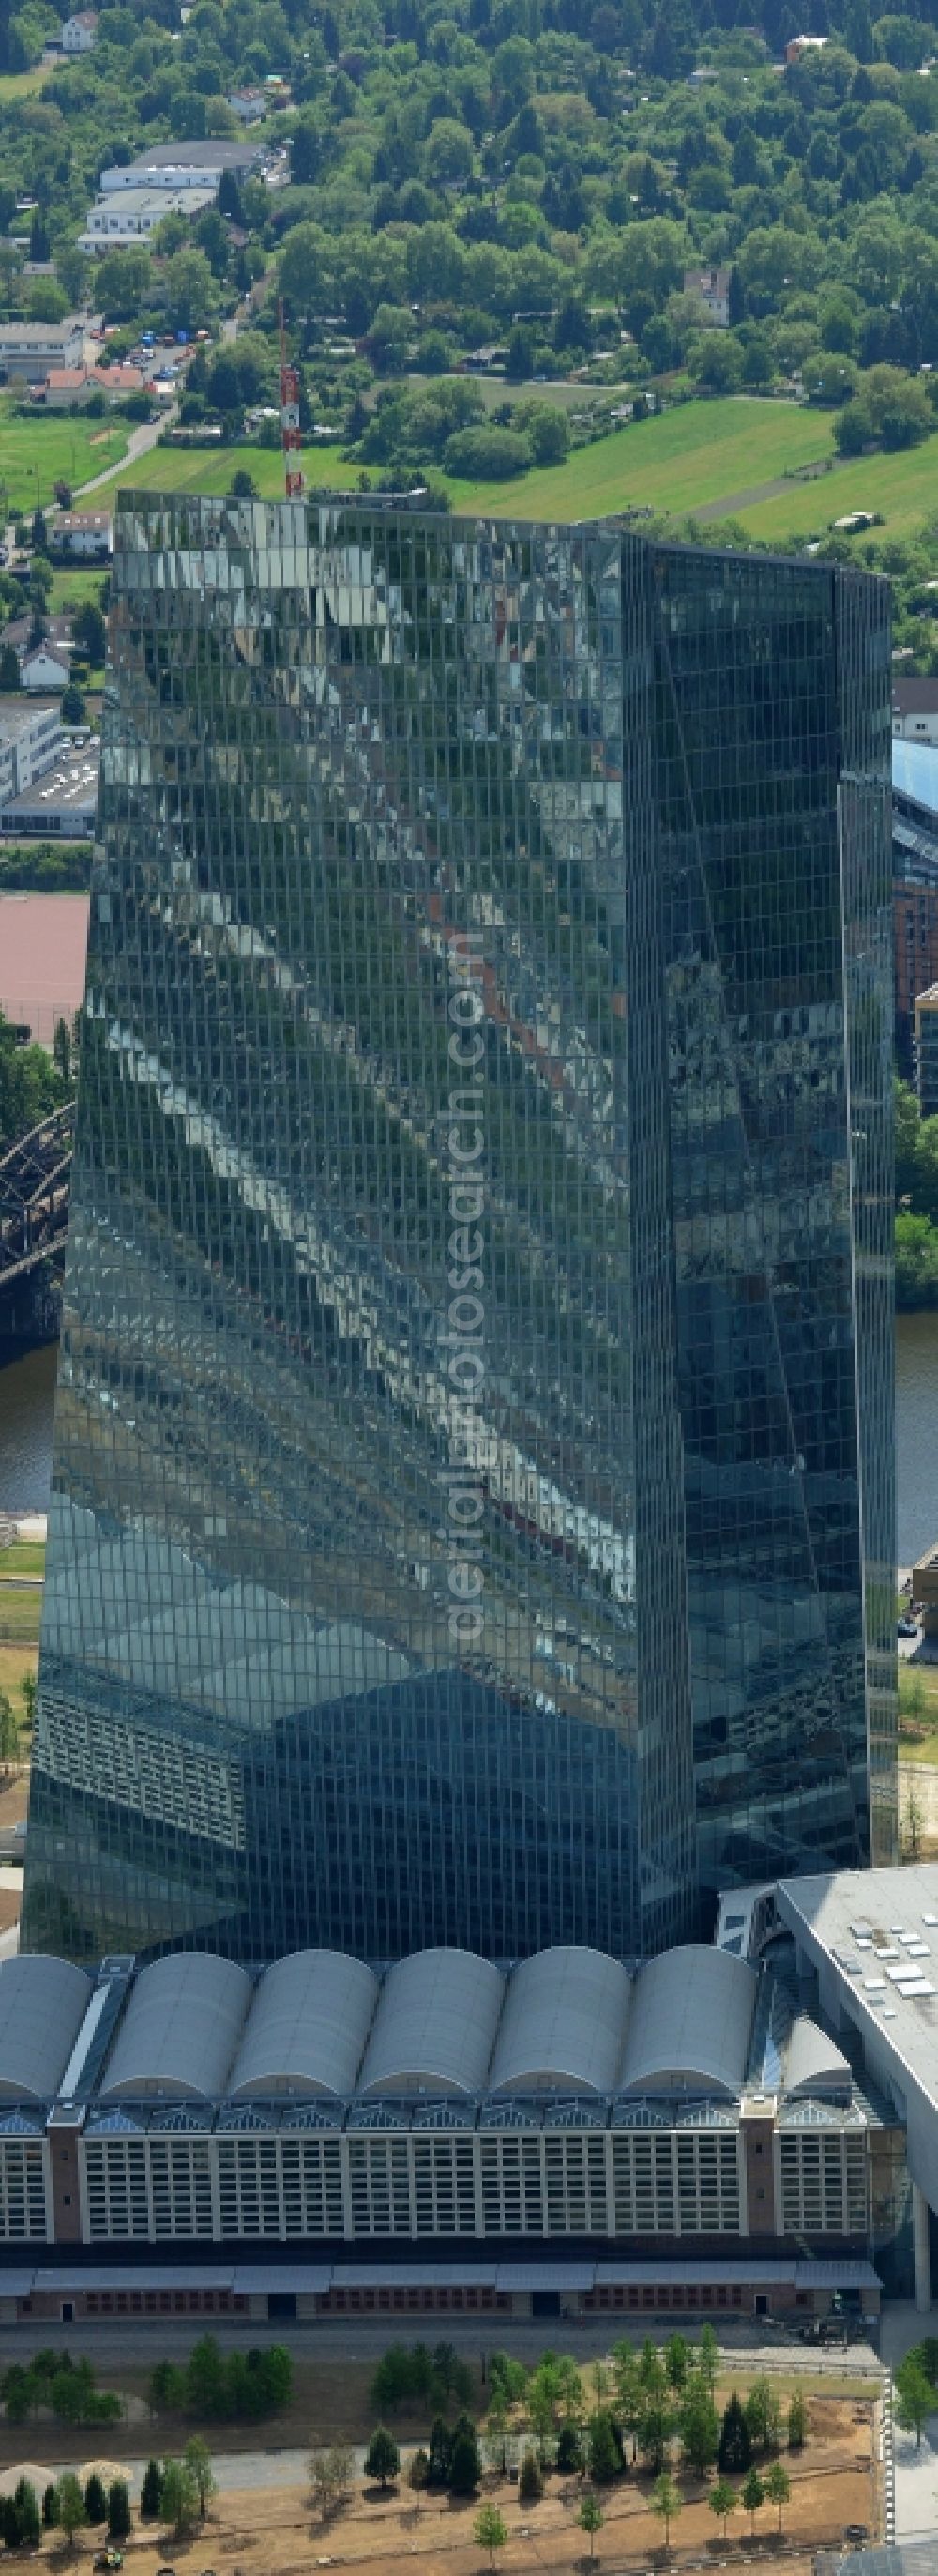 Aerial image Frankfurt am Main - High-rise skyscraper building and bank administration of the financial services company EZB Europaeische Zentralbank in Frankfurt in the state Hesse, Germany